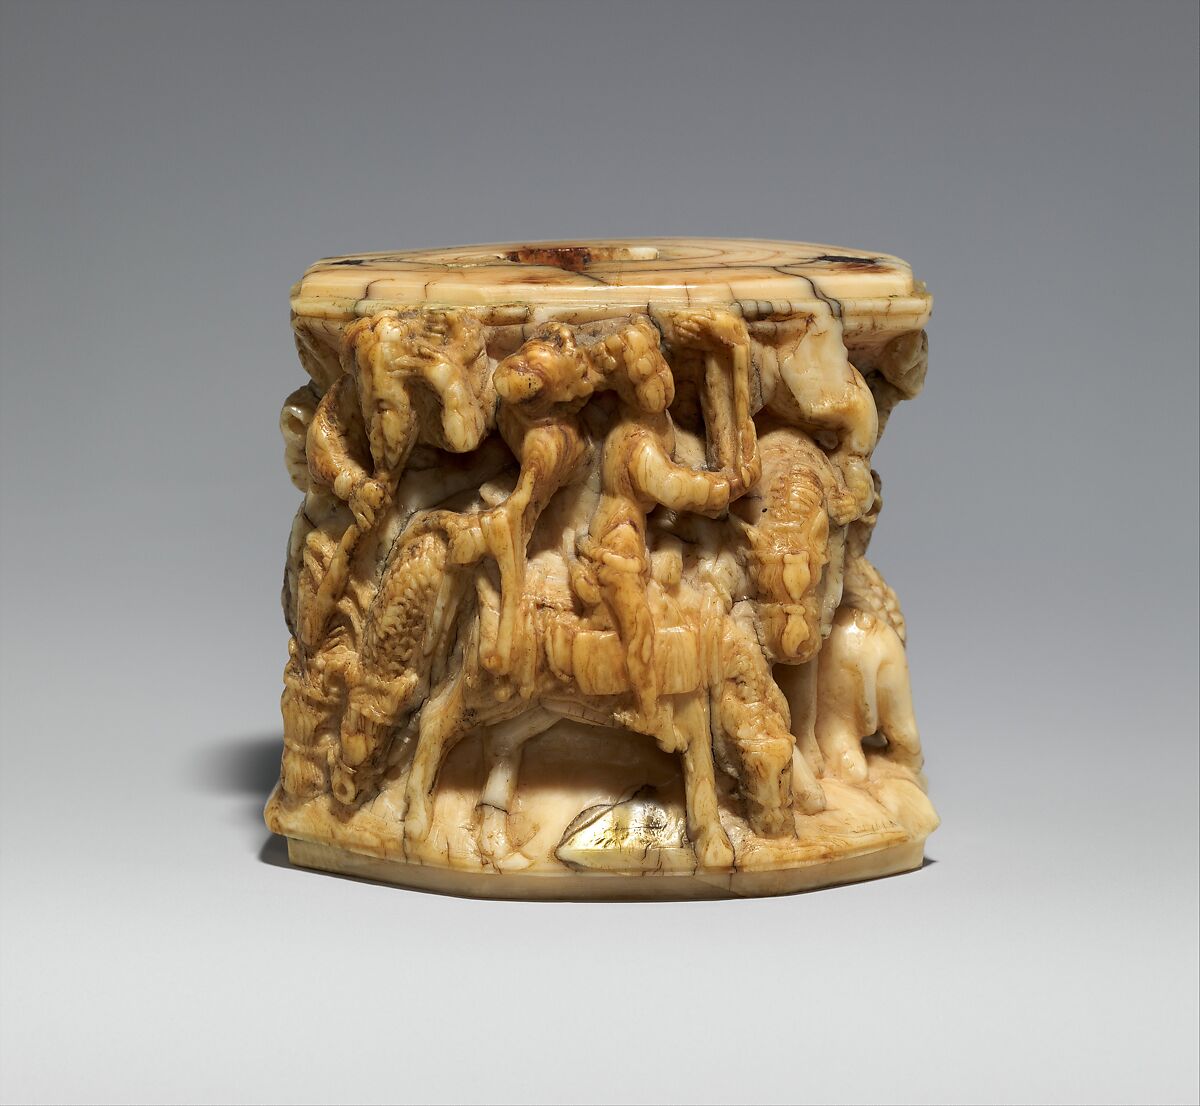 Decorative Mount, Walrus ivory (or whale tooth), German 